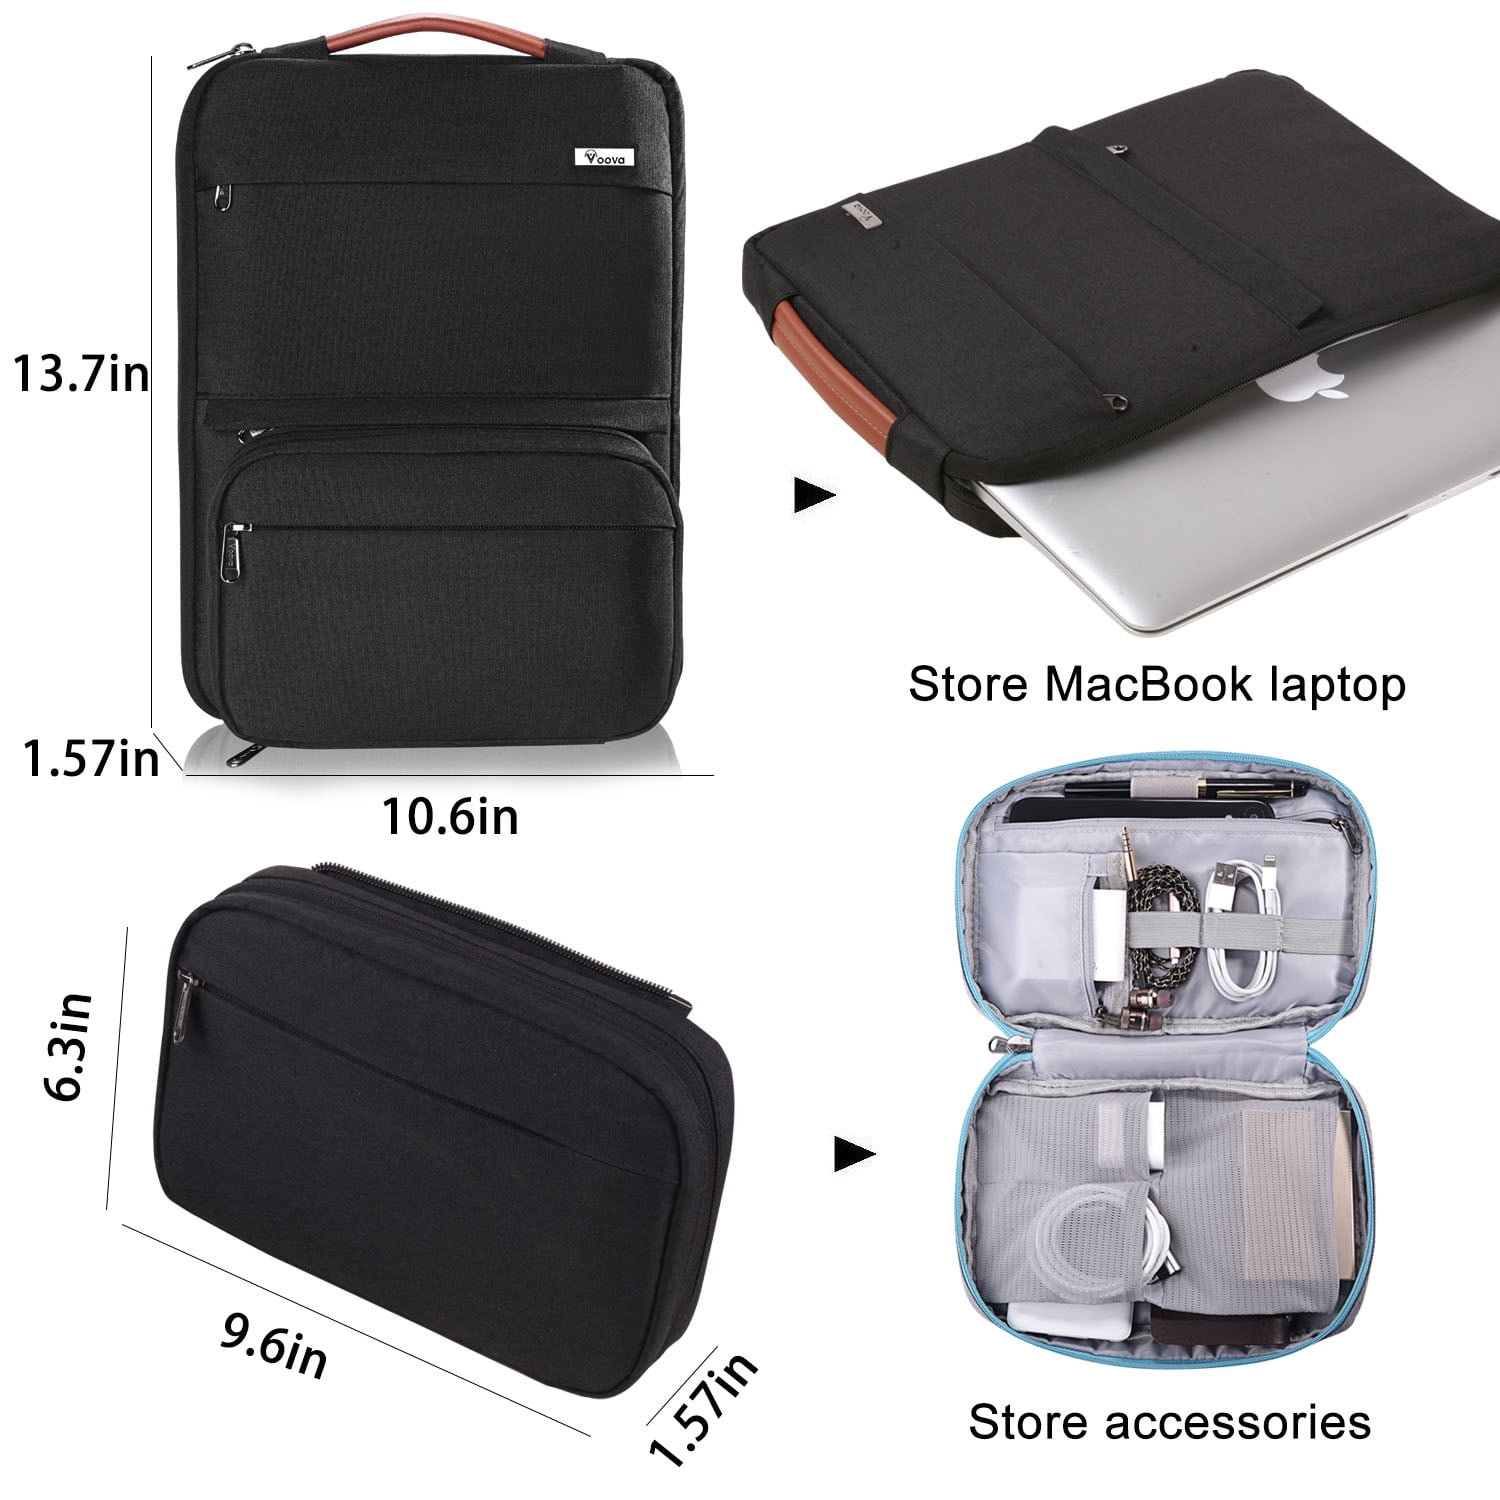 Voova Laptop Sleeve Case,Smart Computer Carry Bag with Detachable 